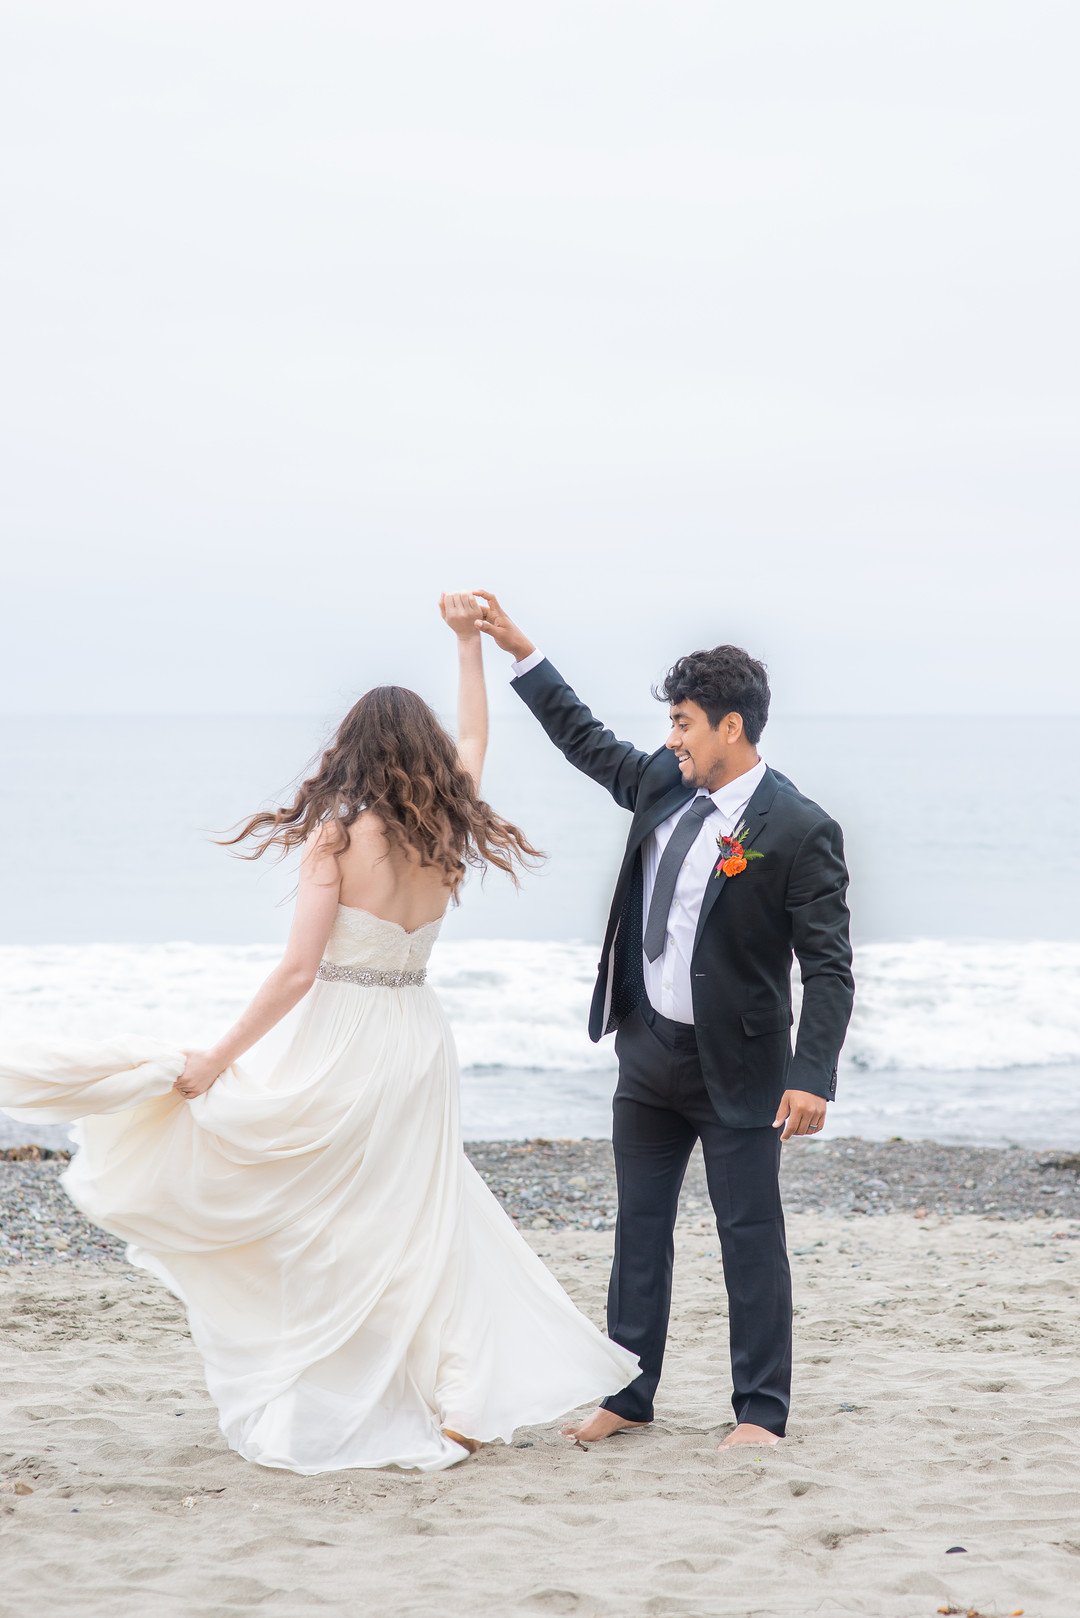 www.santabarbaraweddings.com | Staci &amp; Michael Photography | Hearst Beach | Wedding Gown: Winnie Couture| Wedding Ring: Jared the Gallery of Jewelry | Bridal Beauty: Madi Faye Makeup 